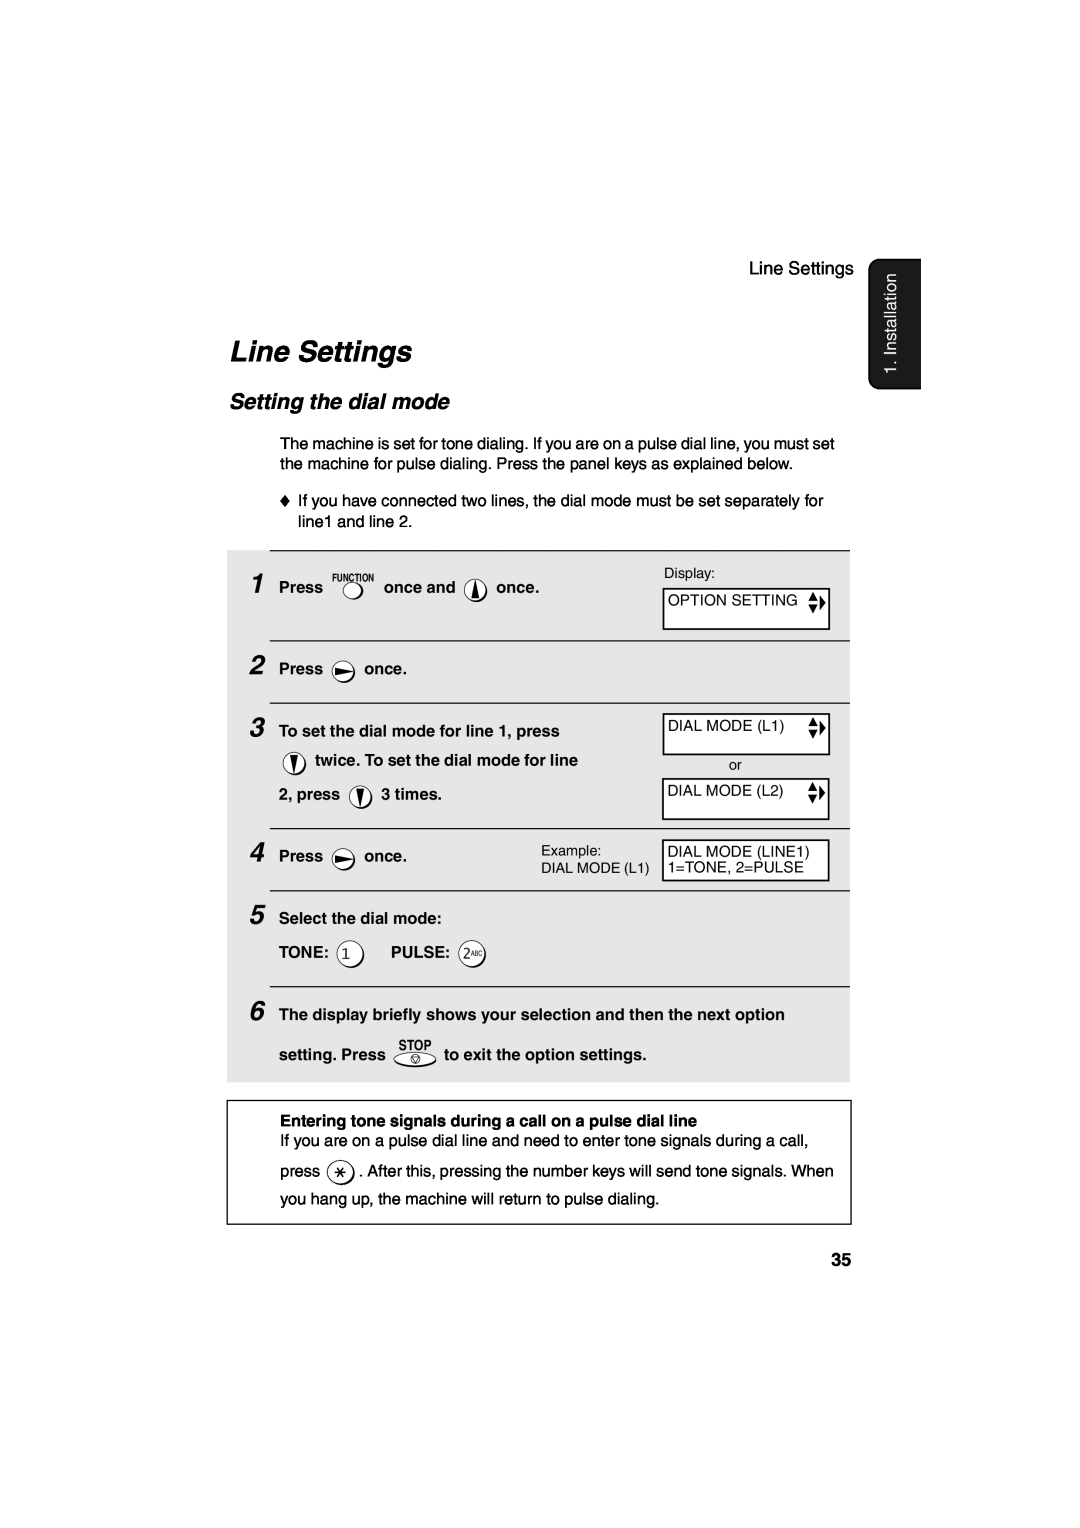 Sharp UX-CD600 operation manual Line Settings, Setting the dial mode, Installation 